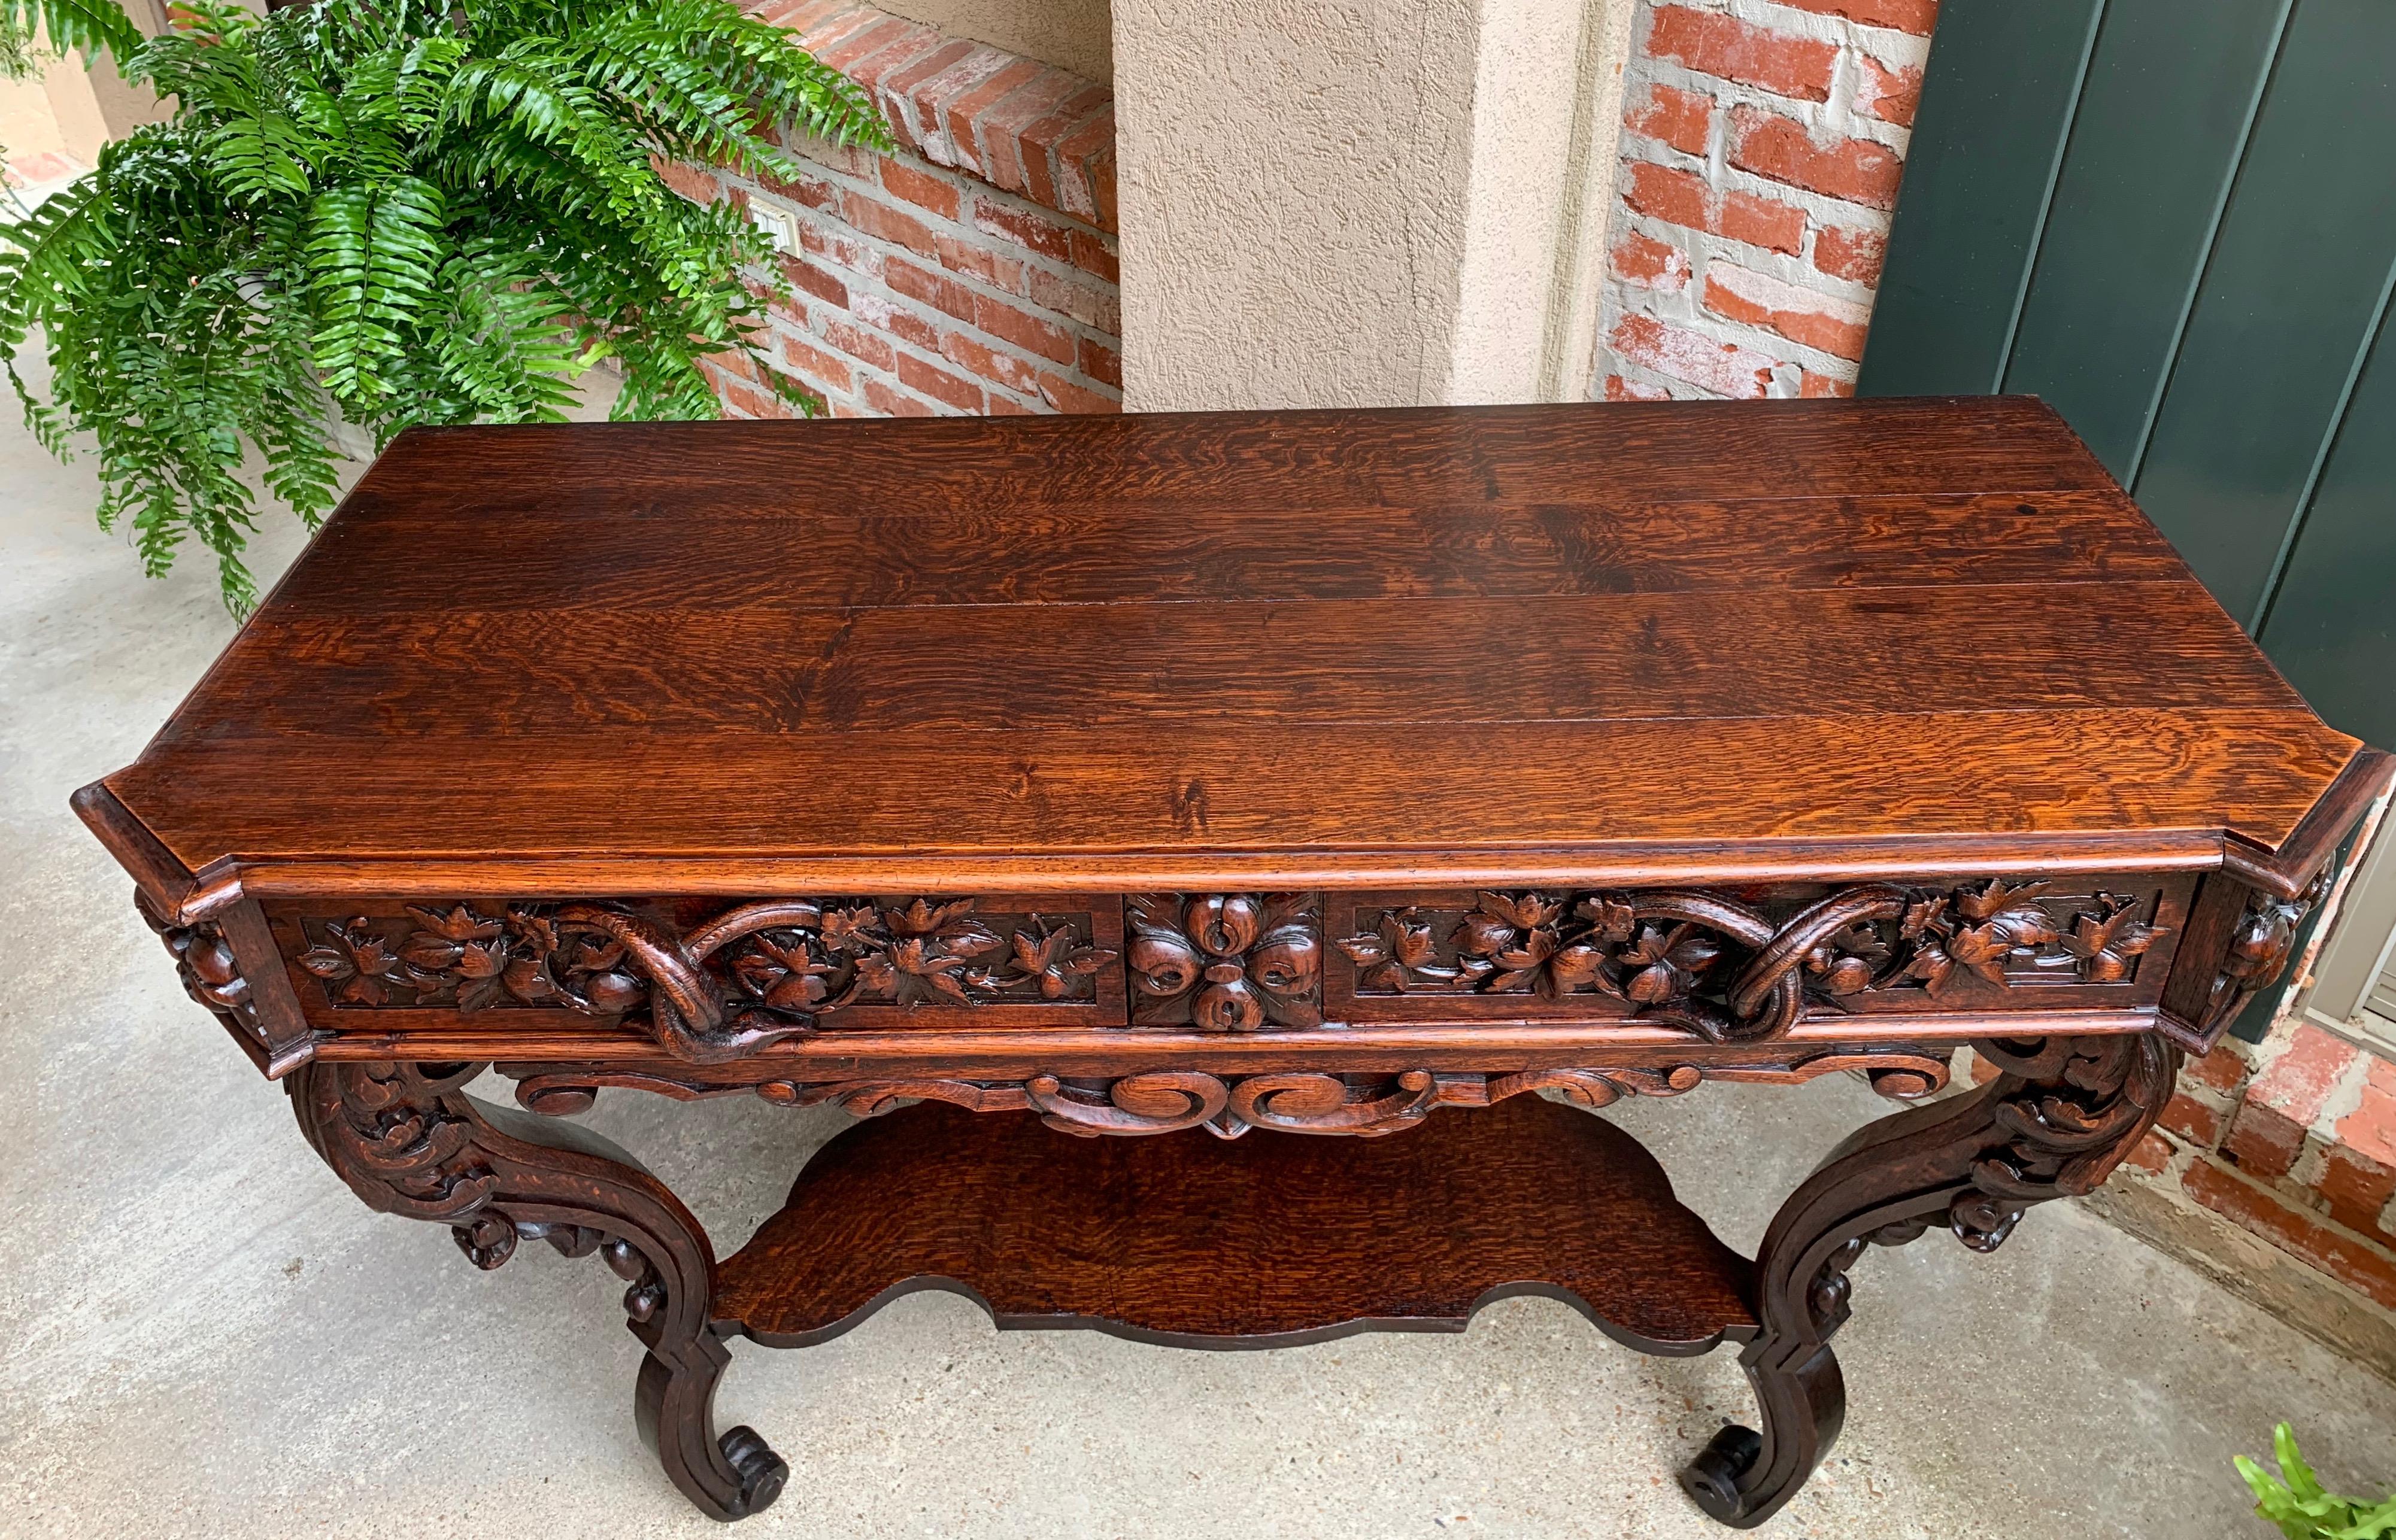 19th century French Carved Oak Console Sofa Foyer Table Sideboard Black Forest For Sale 2